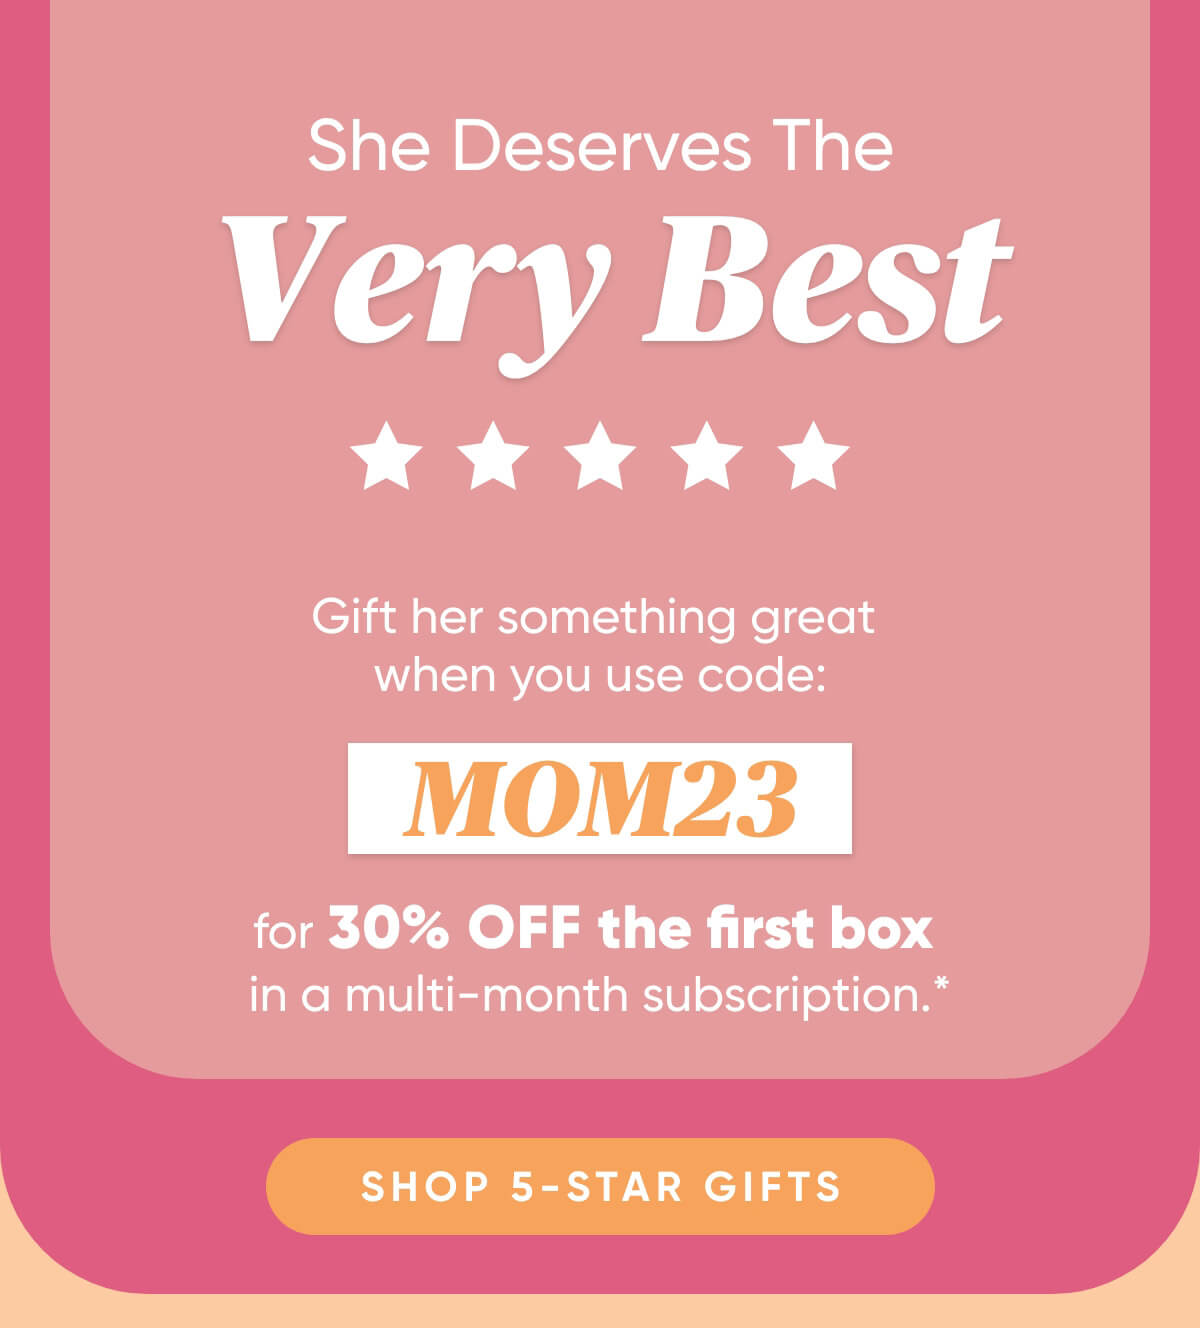 She Deserves The Very Best  Gift Her Something Great When You Use Code: MOM23 For 30% OFF The First Box in a Multi Month Subscription*   Shop 5-Star Gifts